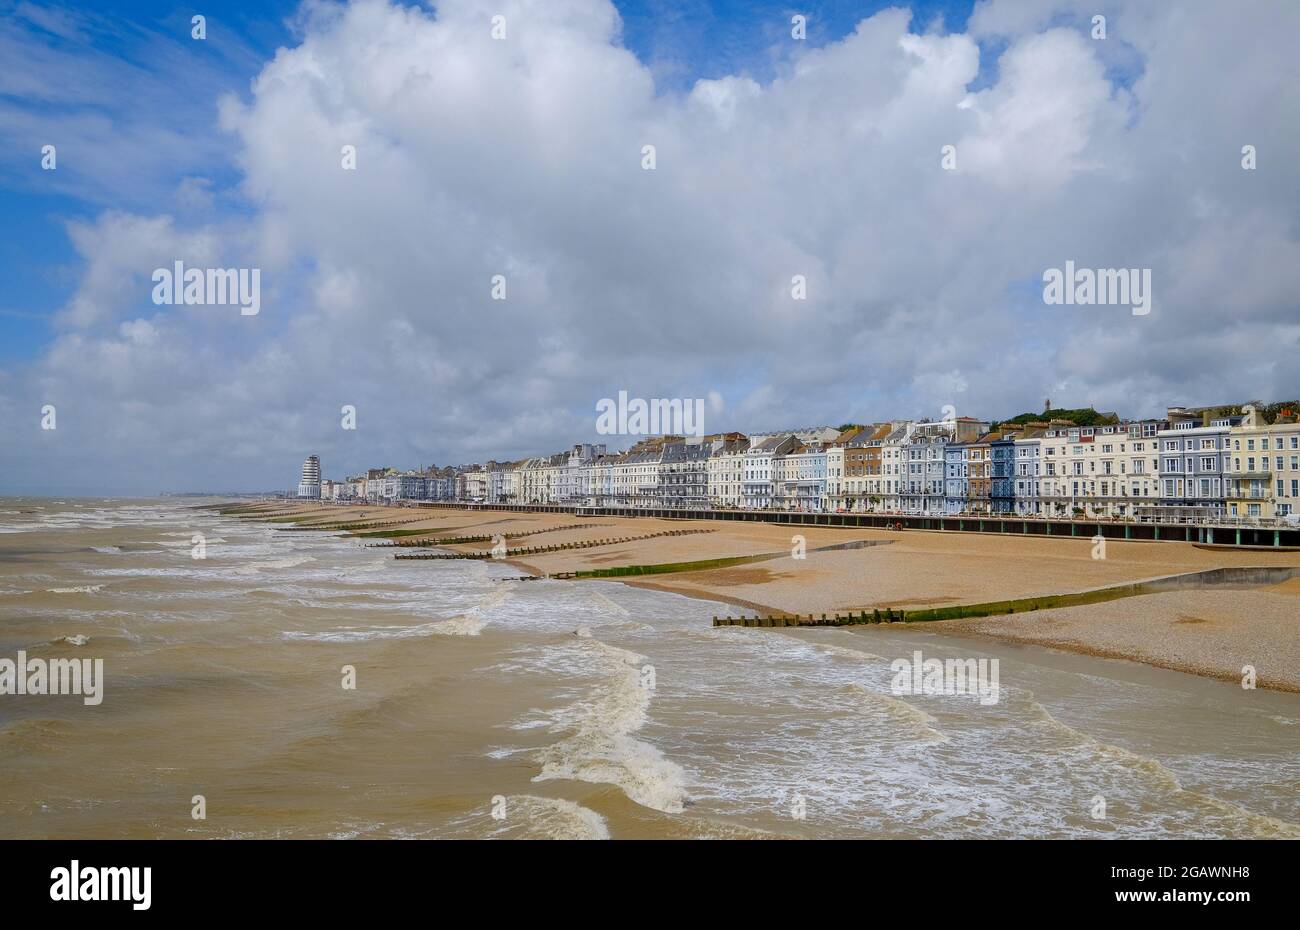 Hastings Beach, Hastling, East Sussex, Regno Unito Foto Stock